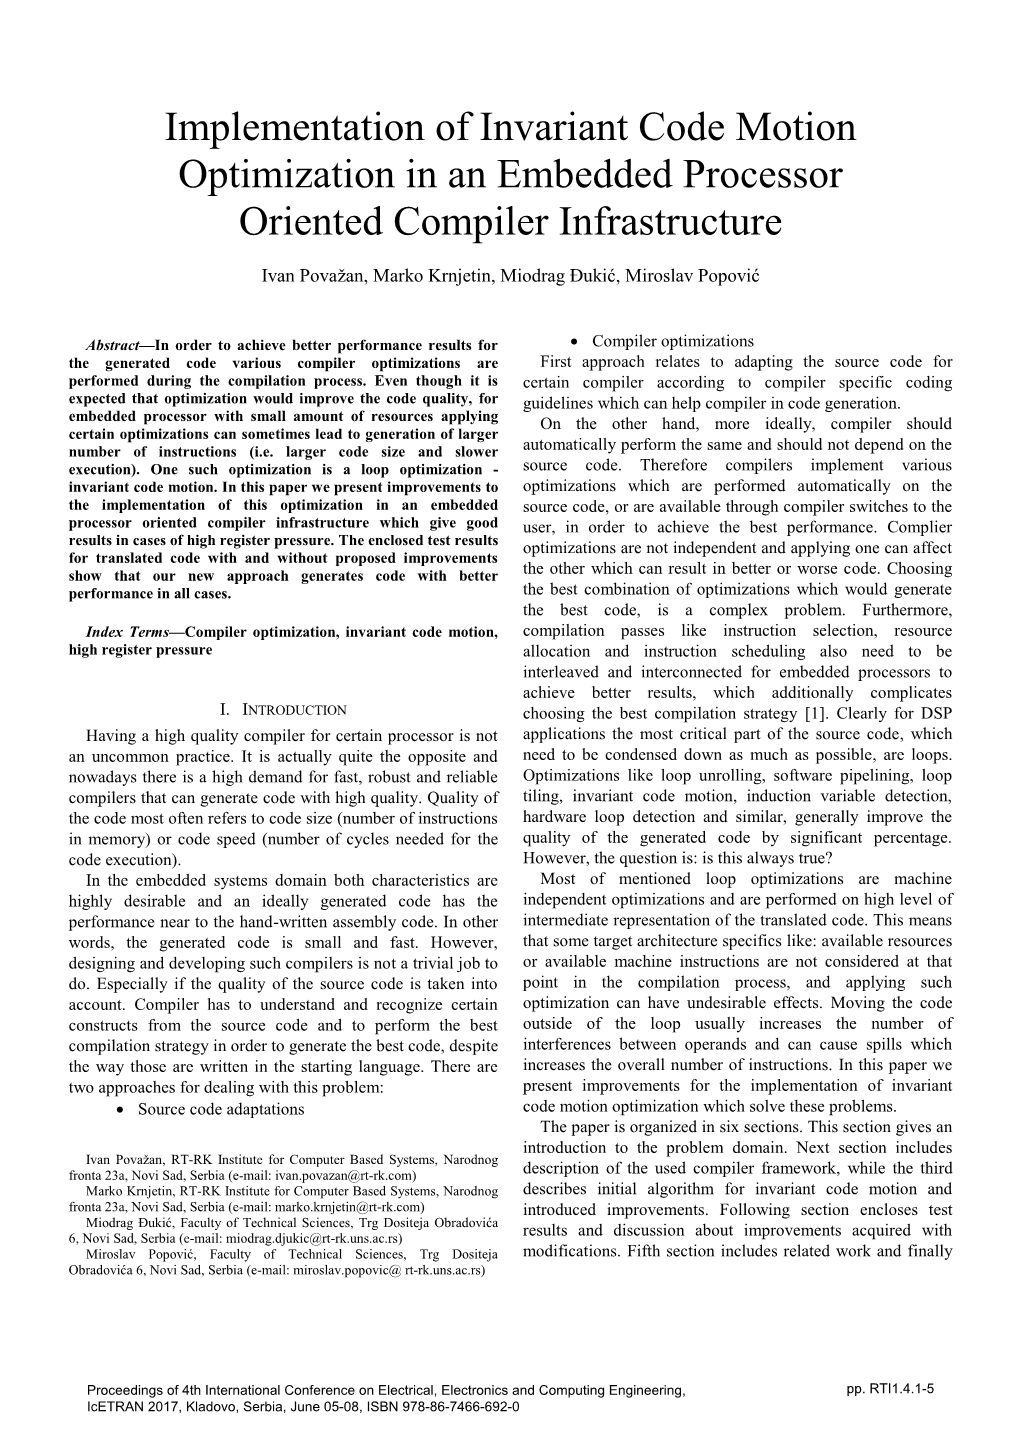 Implementation of Invariant Code Motion Optimization in an Embedded Processor Oriented Compiler Infrastructure